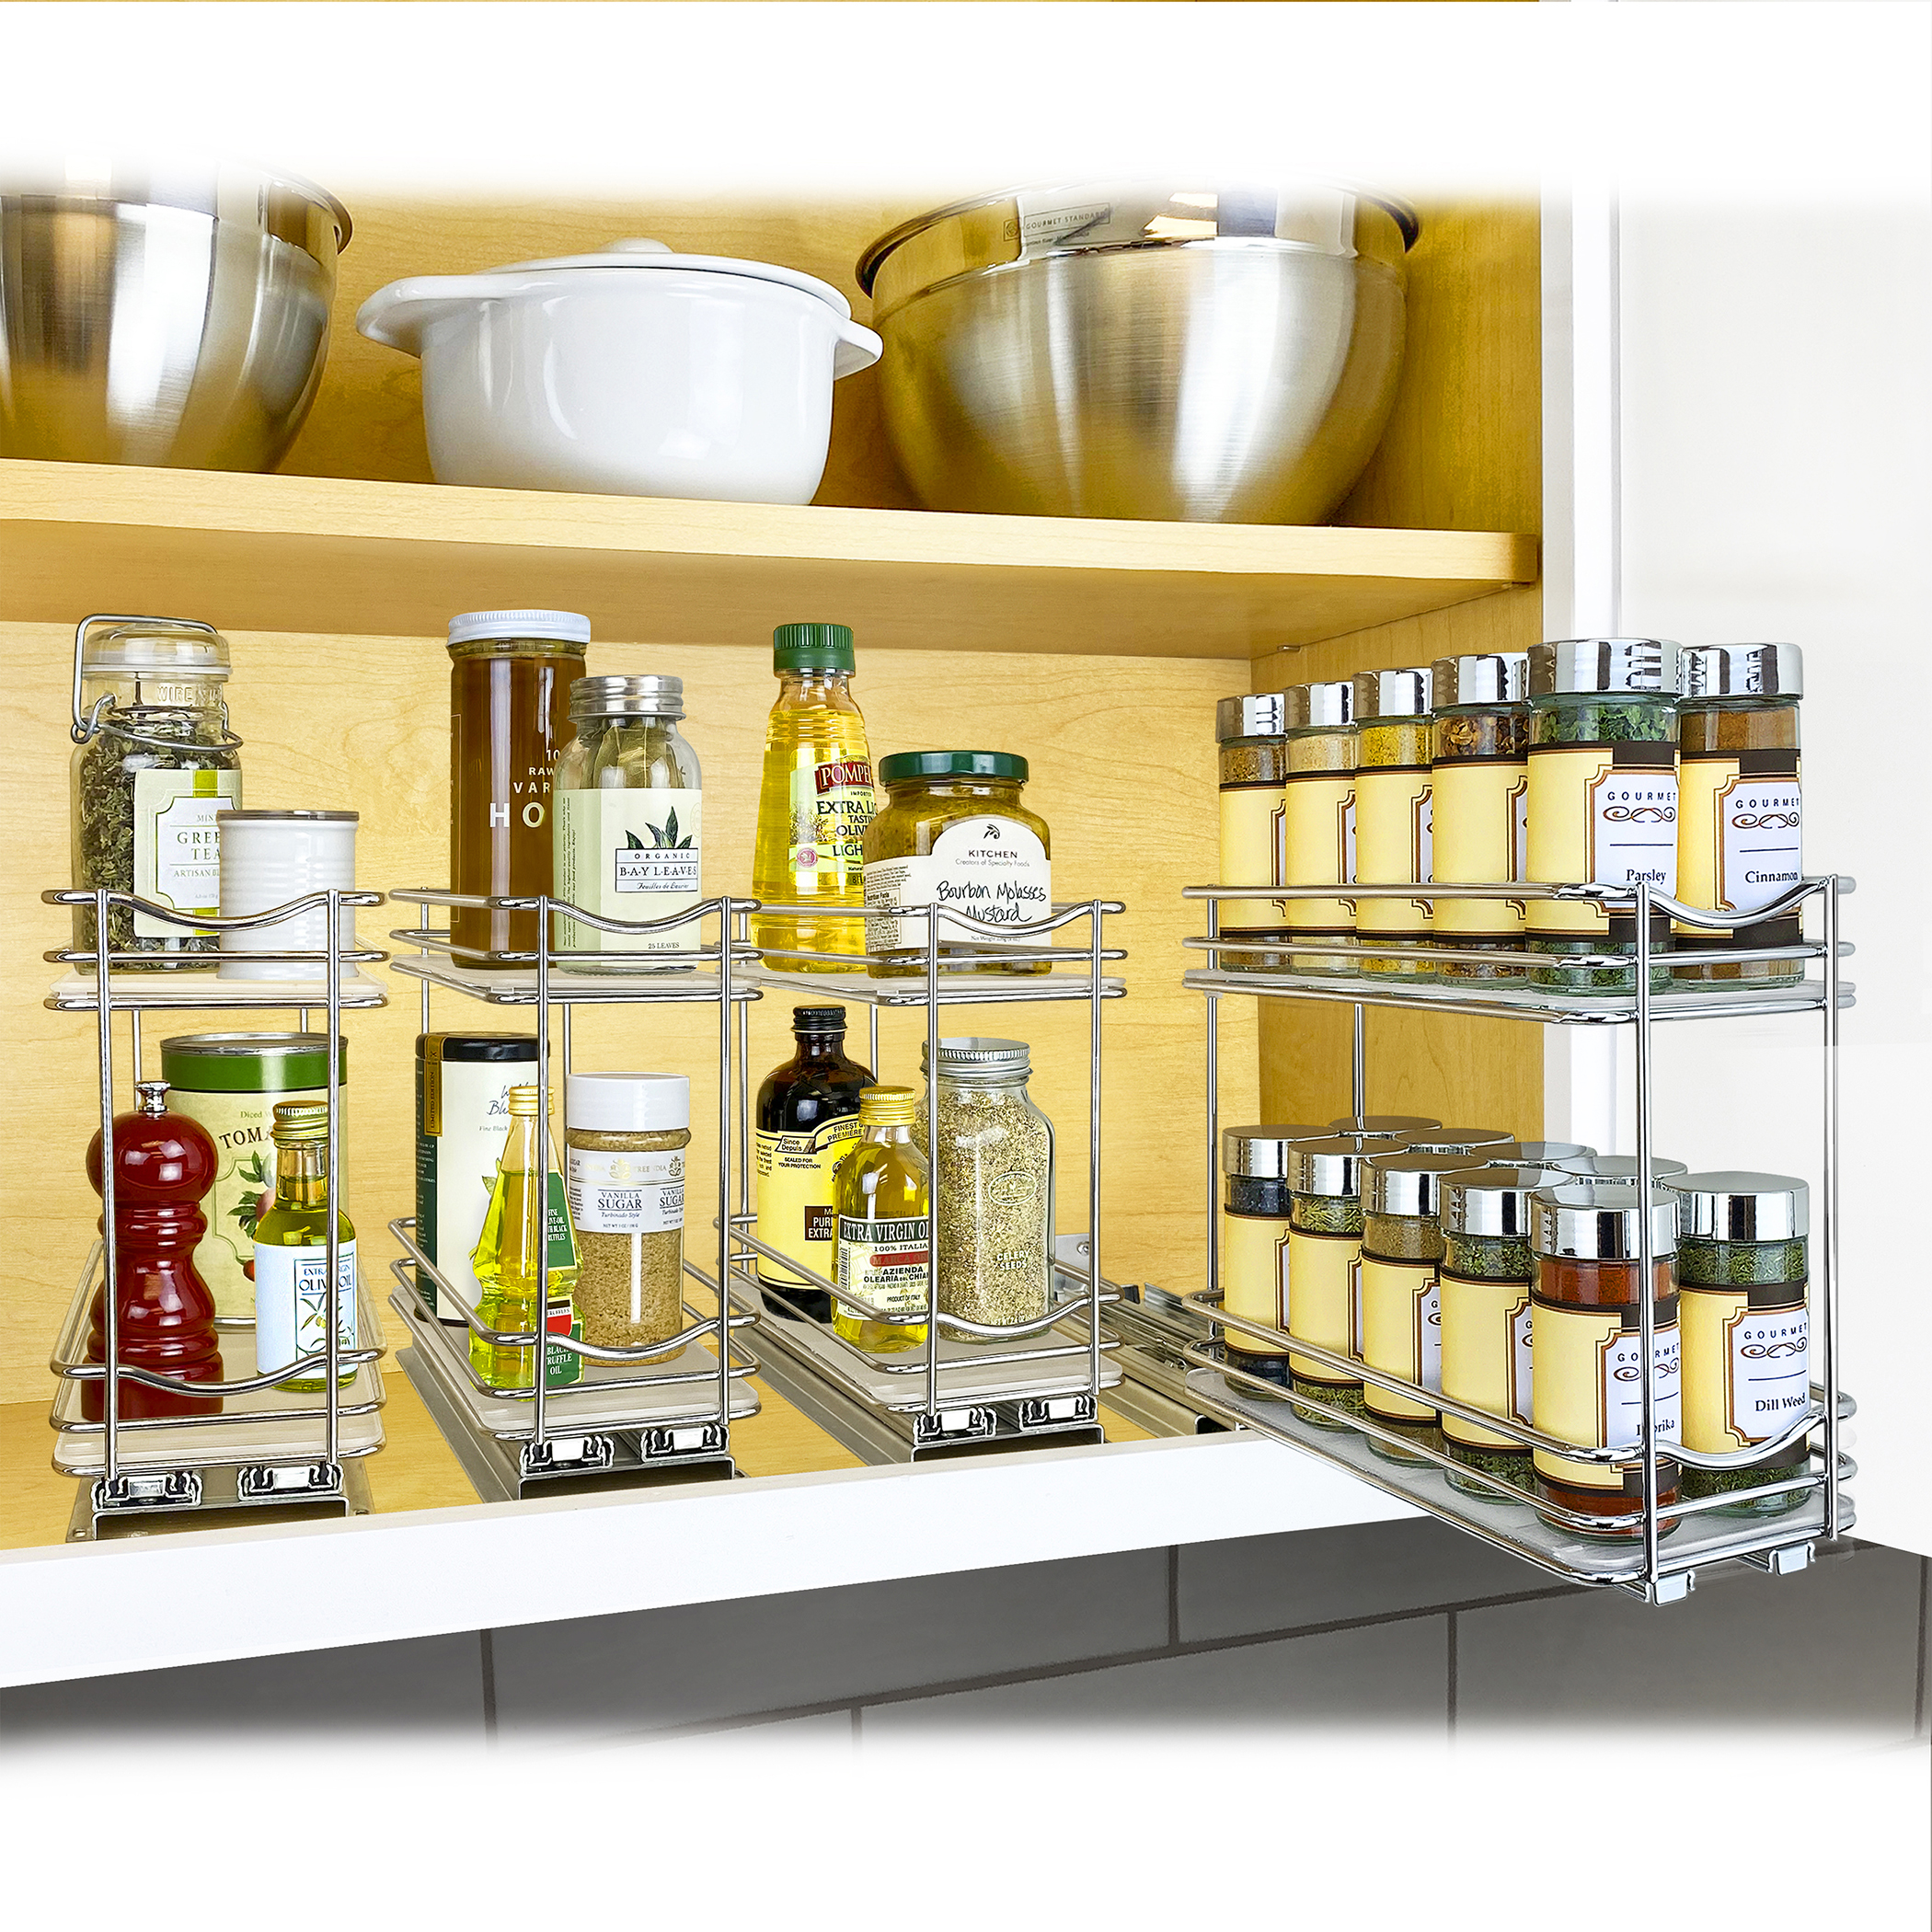 Upperslide Cabinet Caddies Double Spice Rack Pull Out Large (US 303DL)